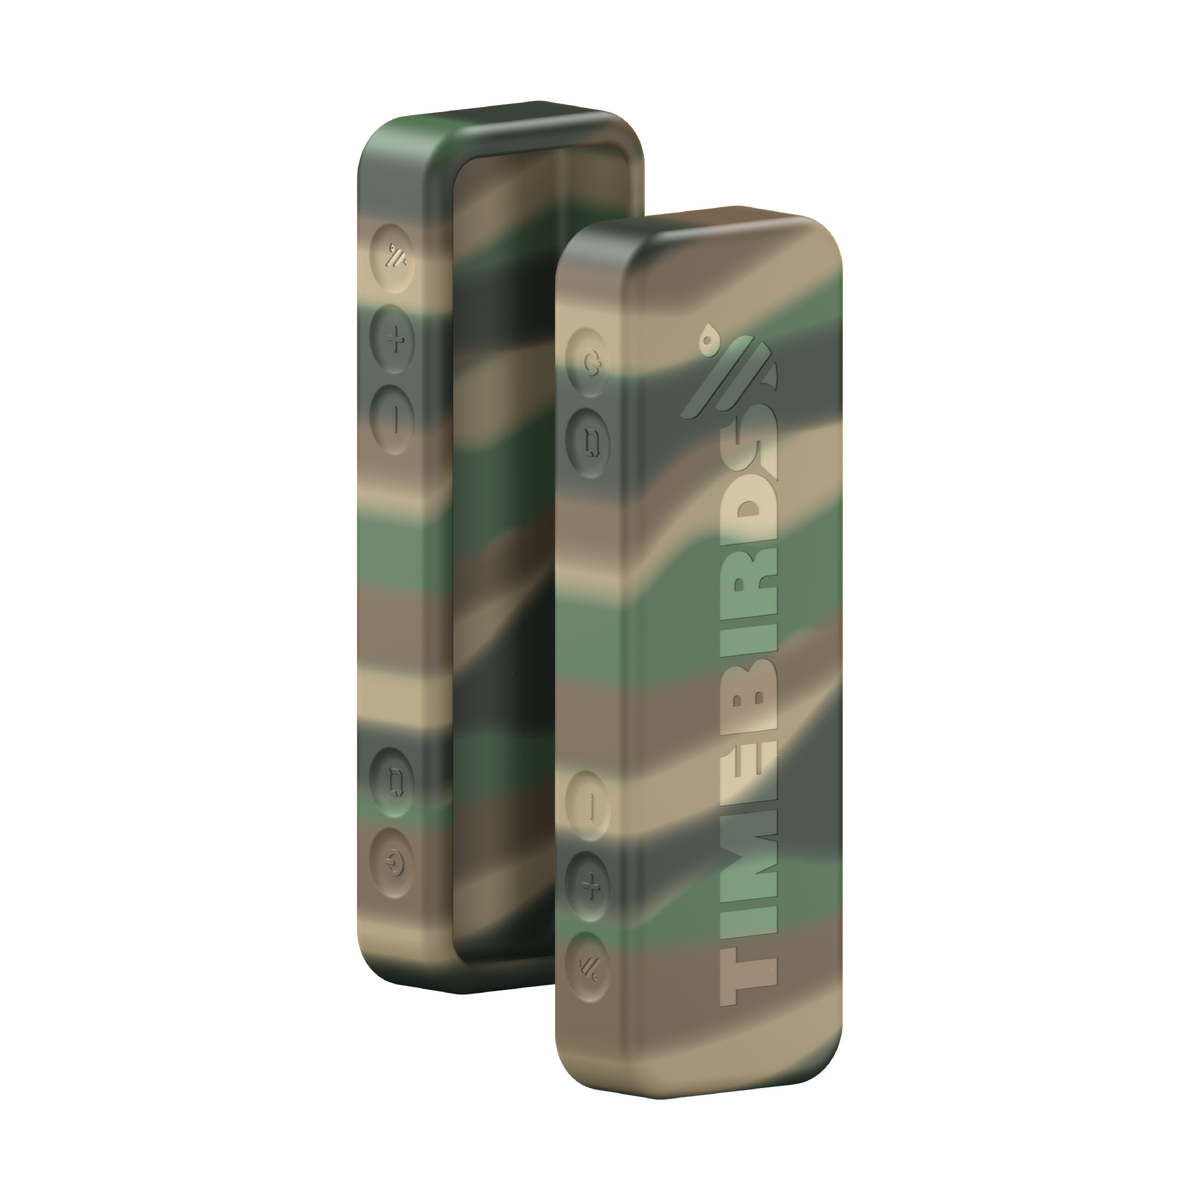 Timebirds™ Protective Case – Woodland Camouflage edition